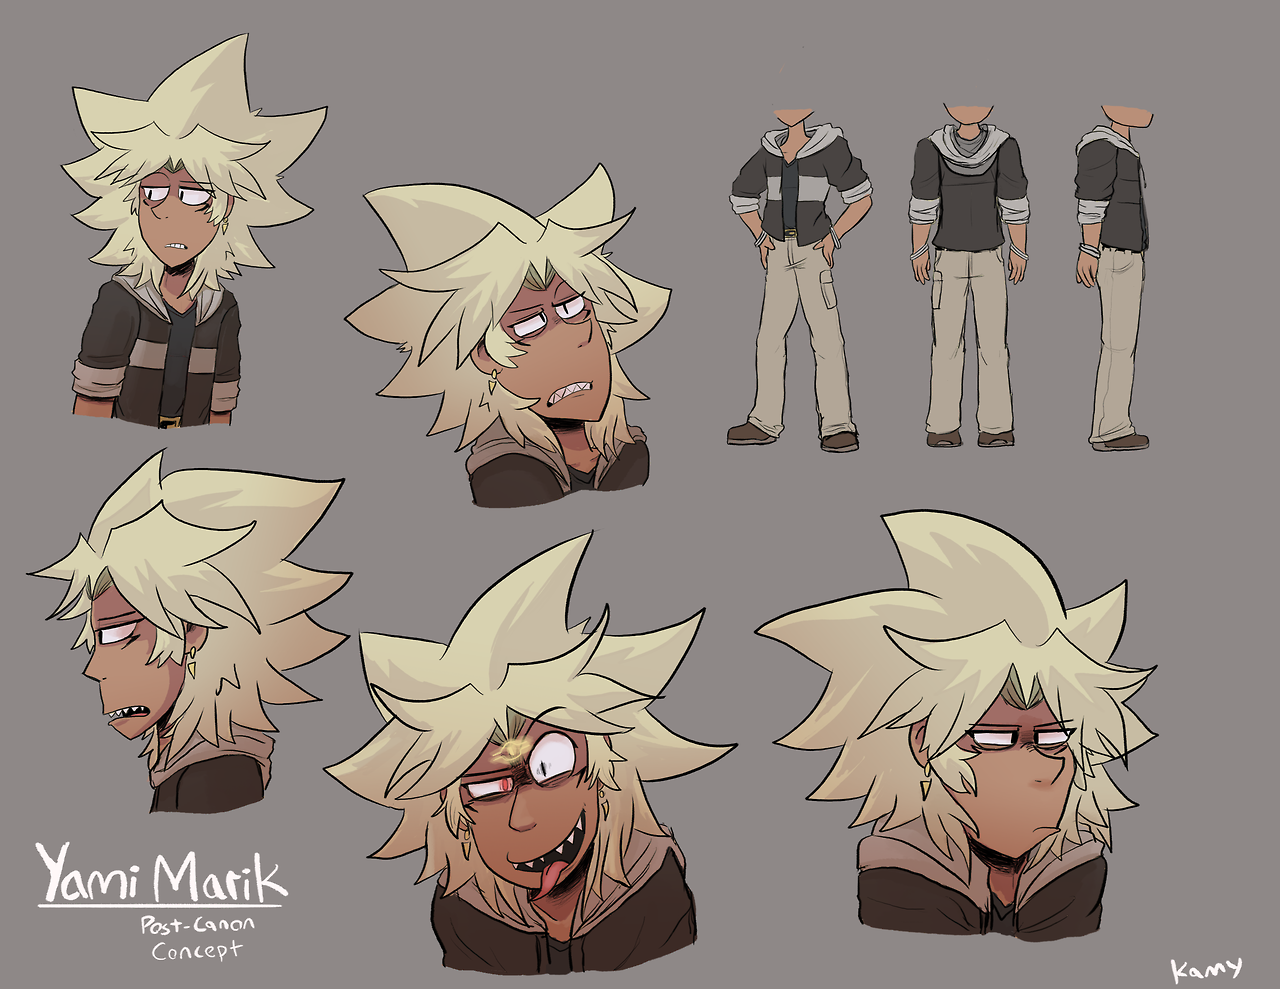 kamydrawstuffs:Practicing my 2nd style &amp; Y.Marik’s post-canon outfit design.